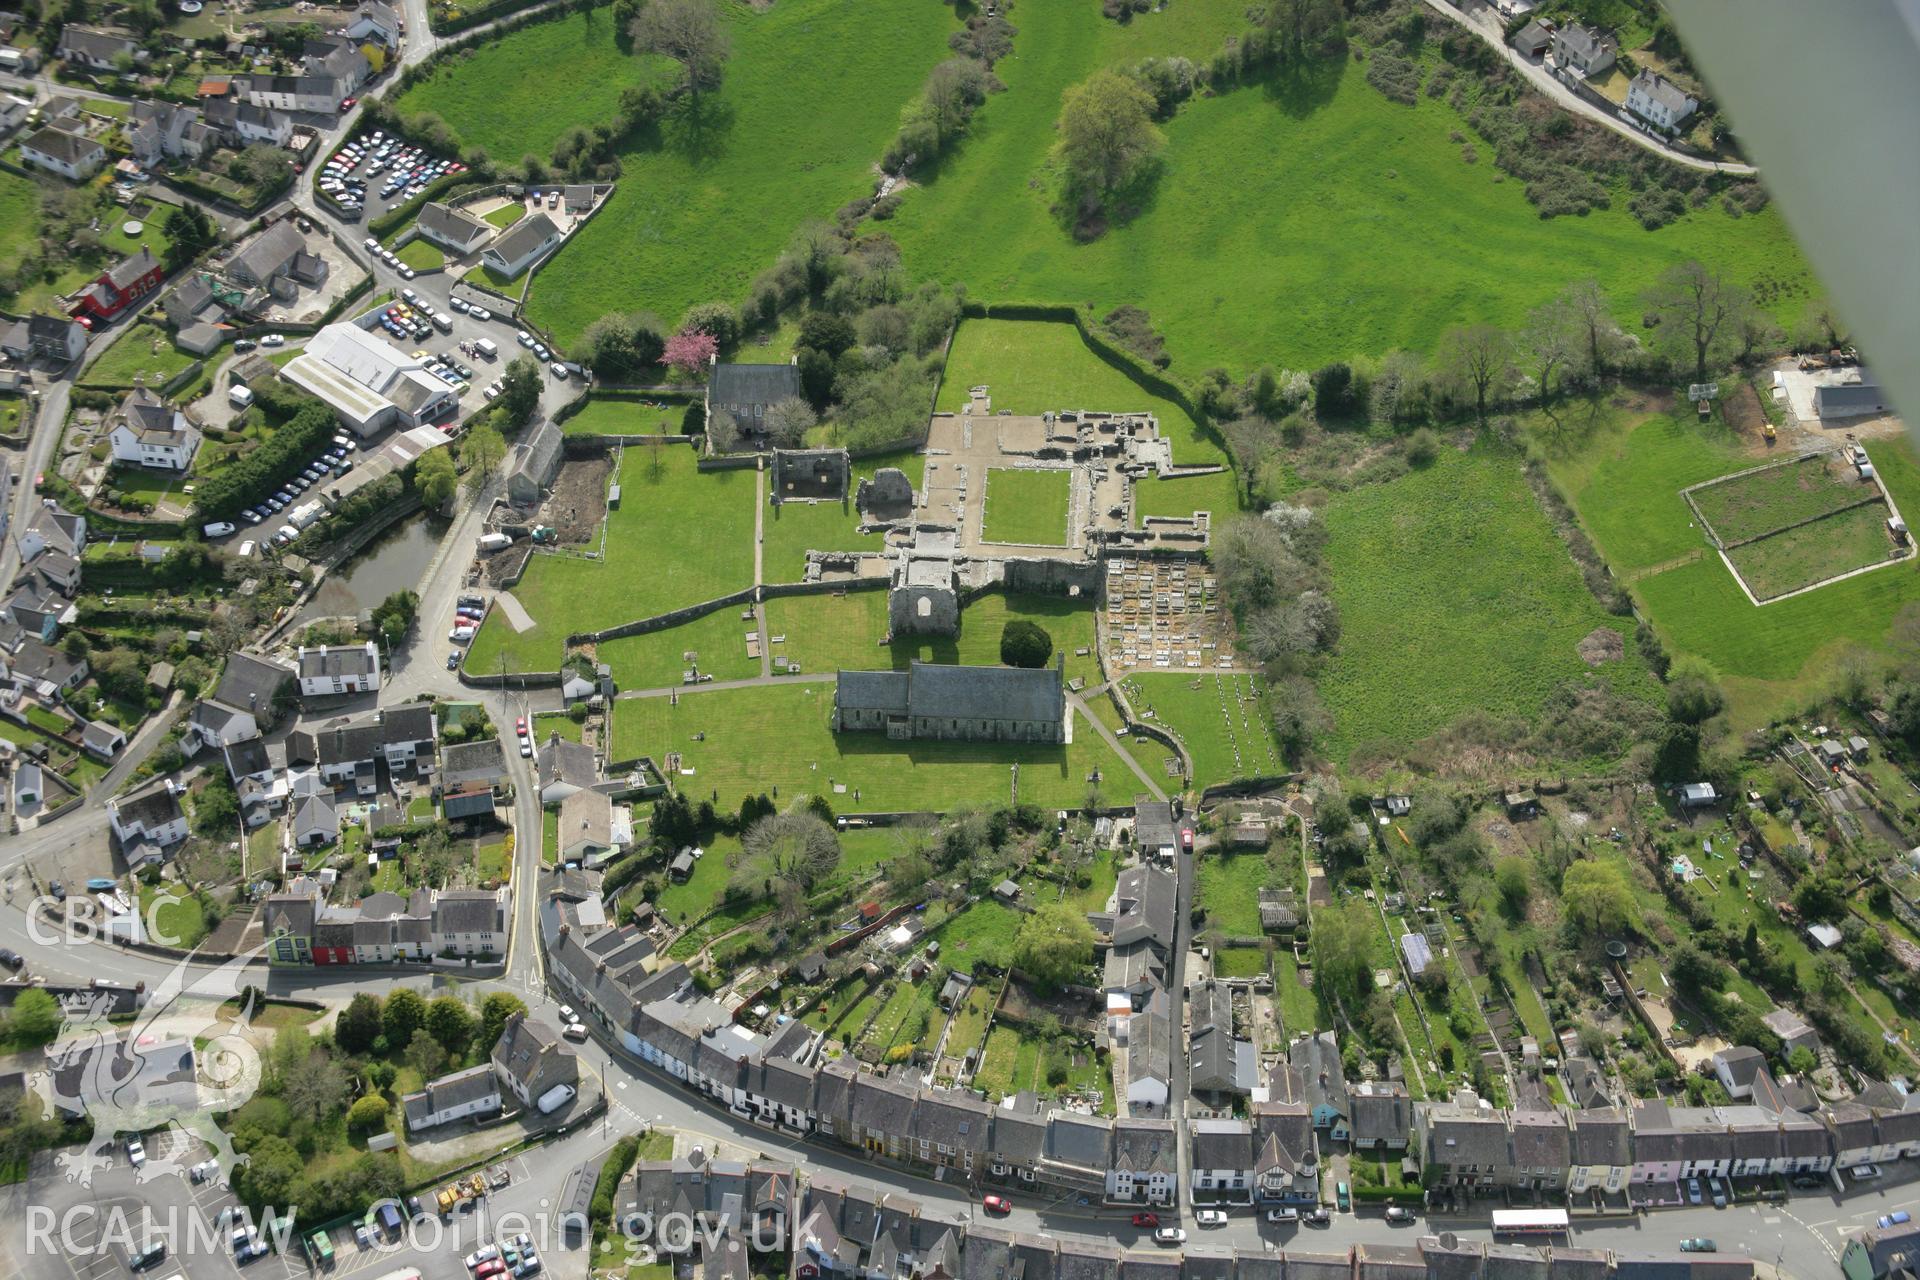 RCAHMW colour oblique aerial photograph of St Dogmaels. Taken on 17 April 2007 by Toby Driver